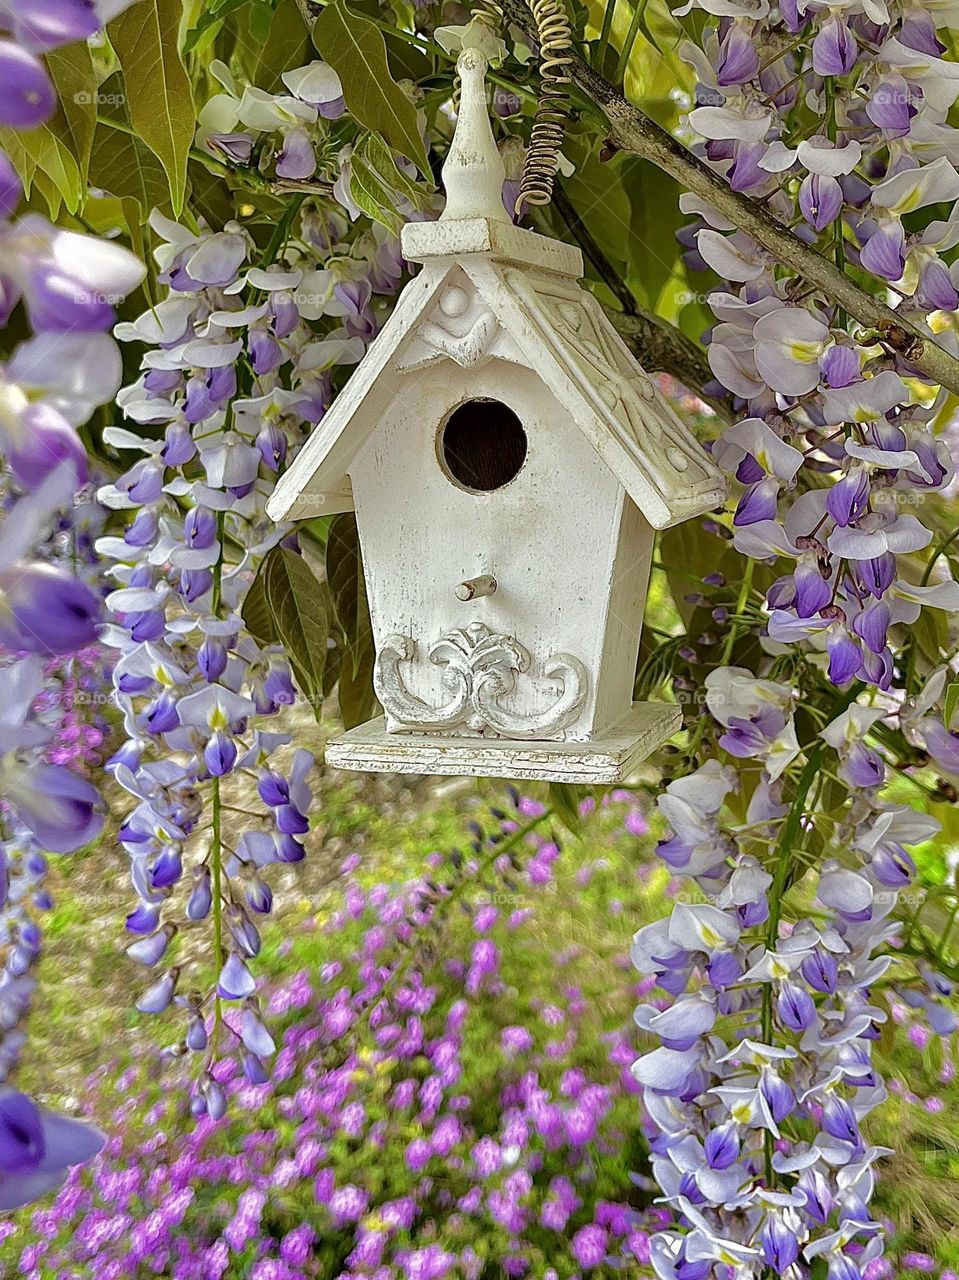 Spring Flowers and Birdhouse